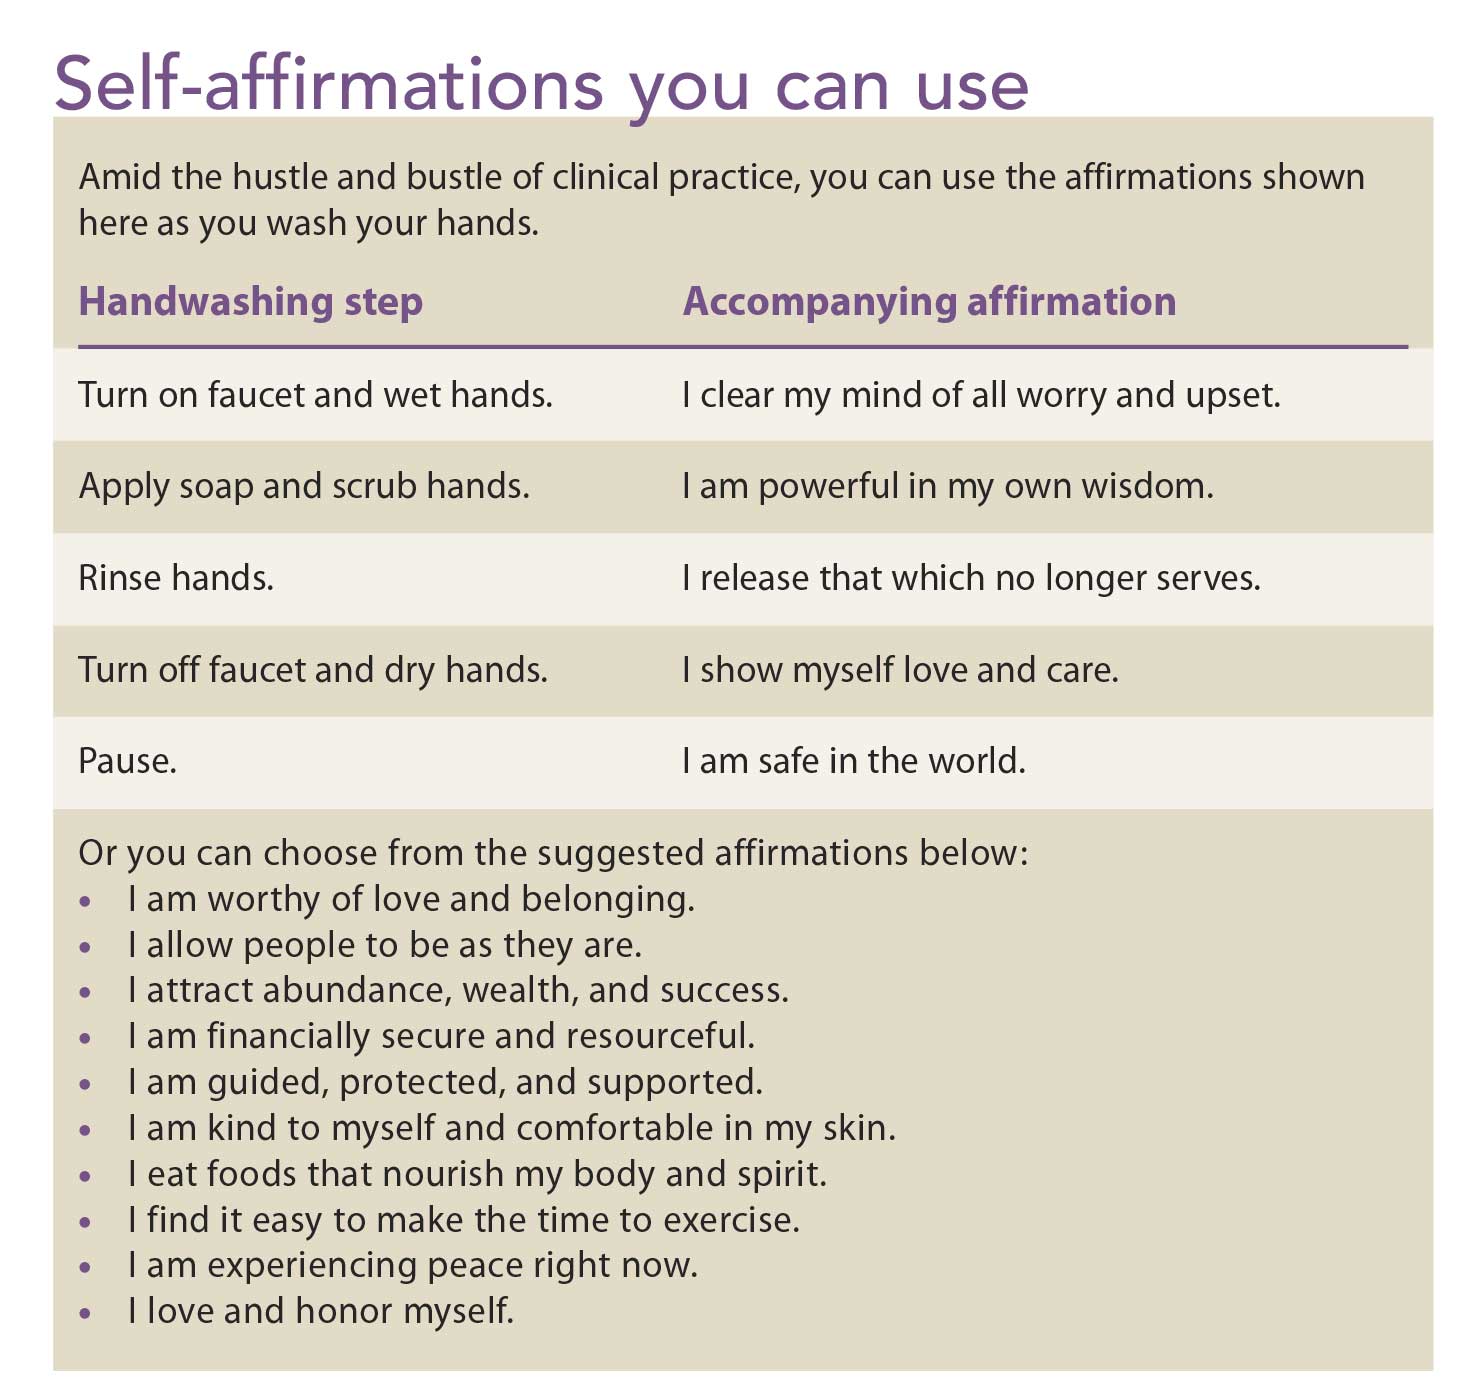 Give yourself the gift of self-affirmation - American Nurse